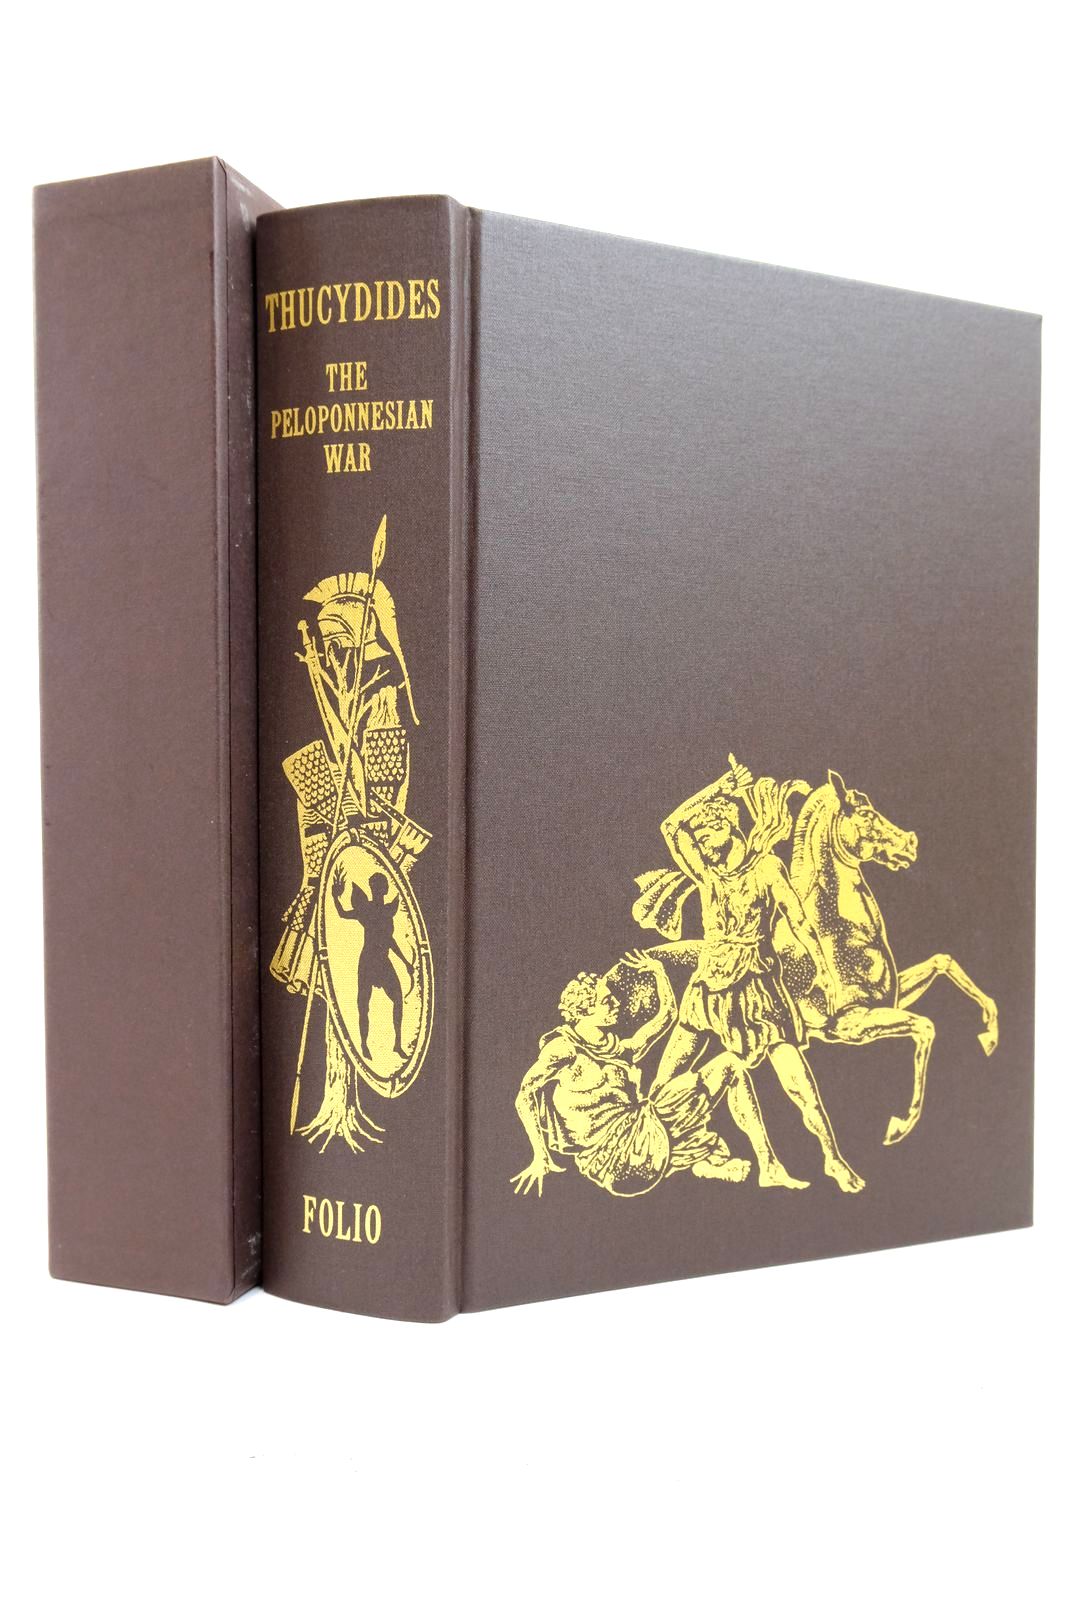 Photo of THUCYDIDES: THE HISTORY OF THE PELOPONNESIAN WAR- Stock Number: 2140933